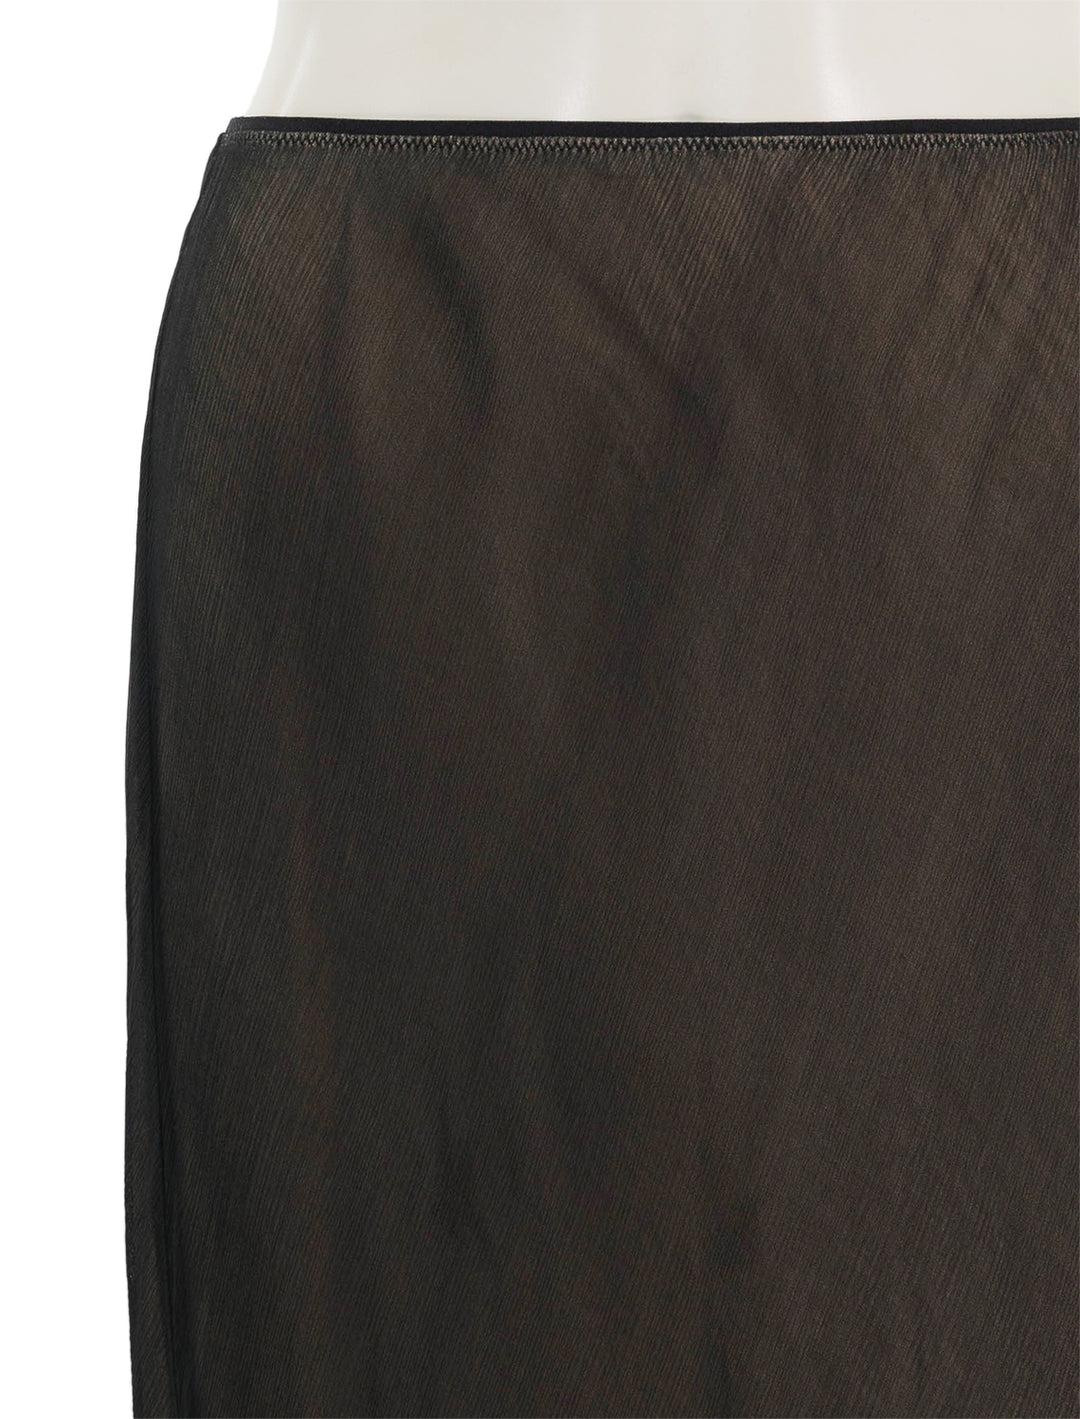 Close-up view of Vince's sheer slip skirt in black.